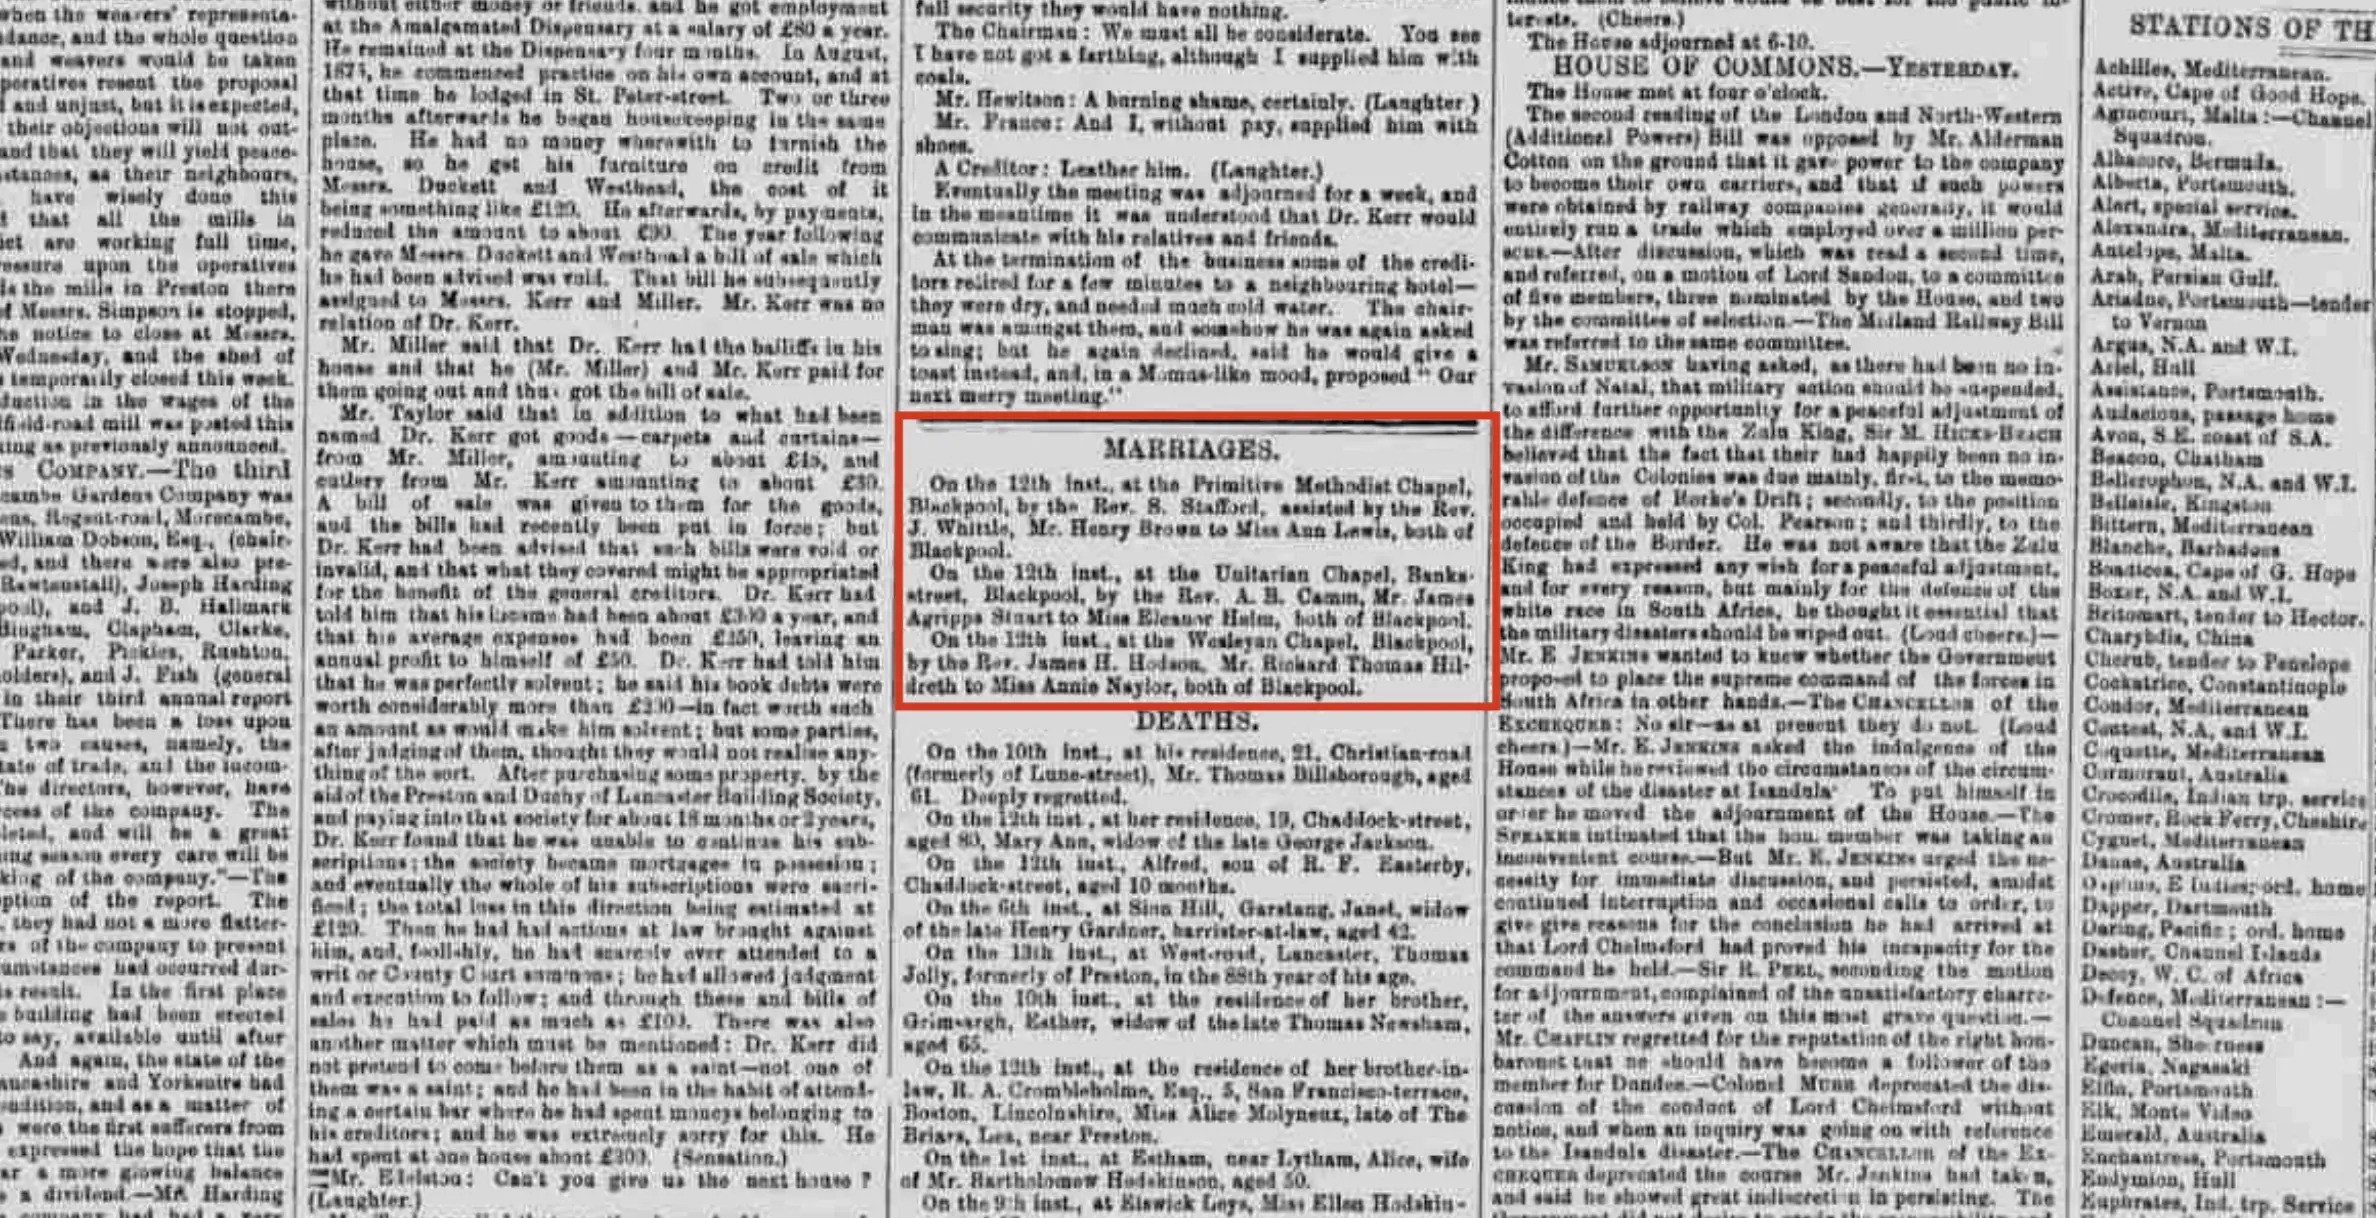 1879 newspaper cutting about Wesleyan marriages